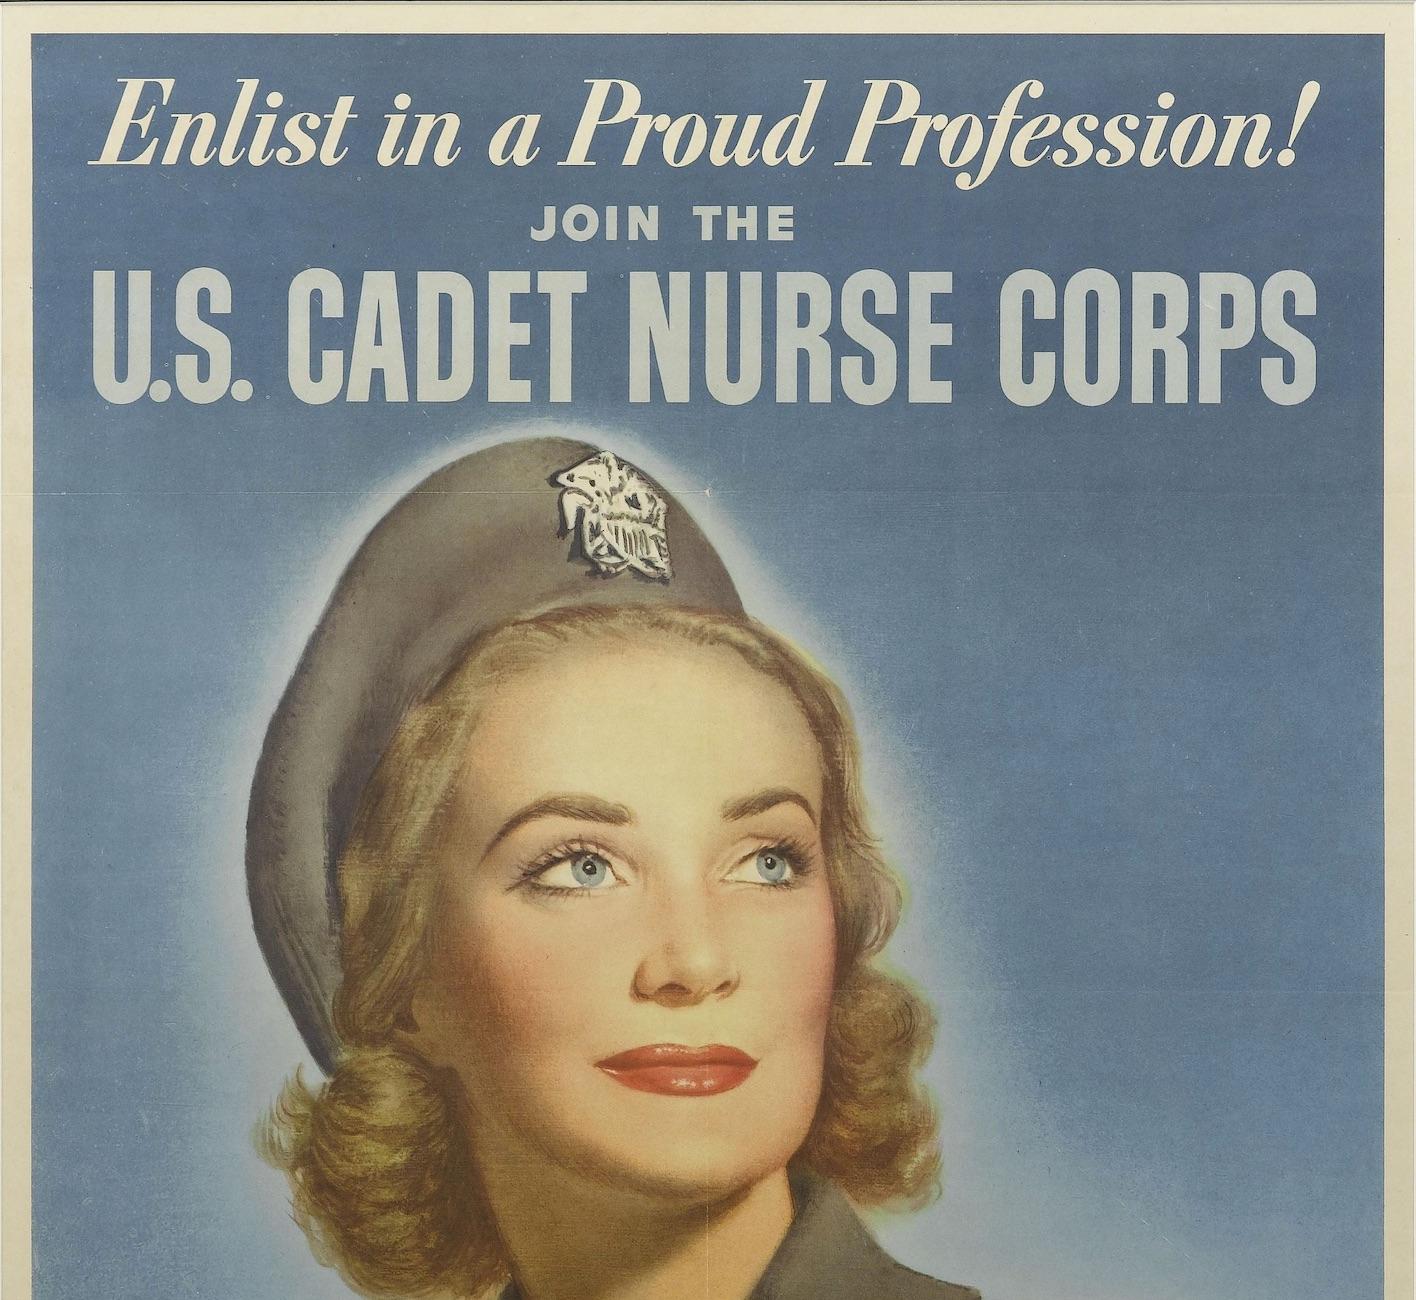 Offered is a vintage WWII U.S. Cadet Nurse Corps recruitment poster. Highlighting a female cadet in uniform, the poster encourages readers to “Enlist in a Proud Profession! Join U.S. Nurse Corps.” It continues with “A Lifetime Education - Free! If